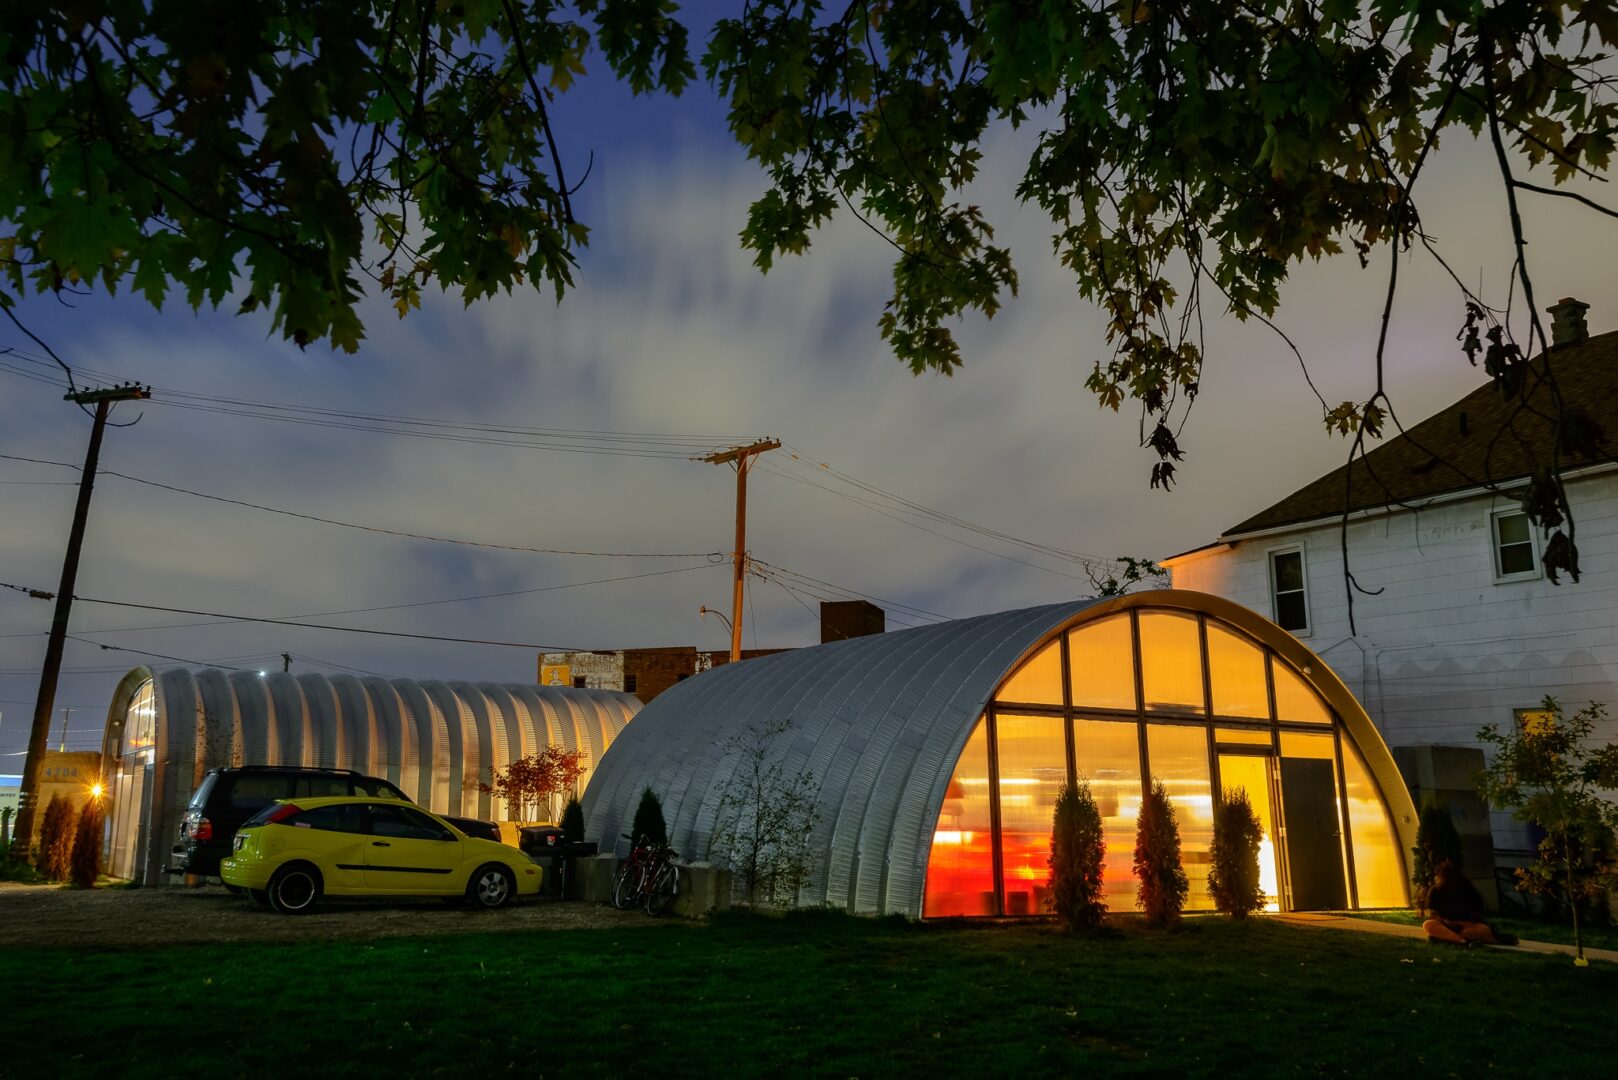 two cars parked outside steel building yellow car by steel building steel building with lights on during the night trees by steel building side by side steel buildings arch style